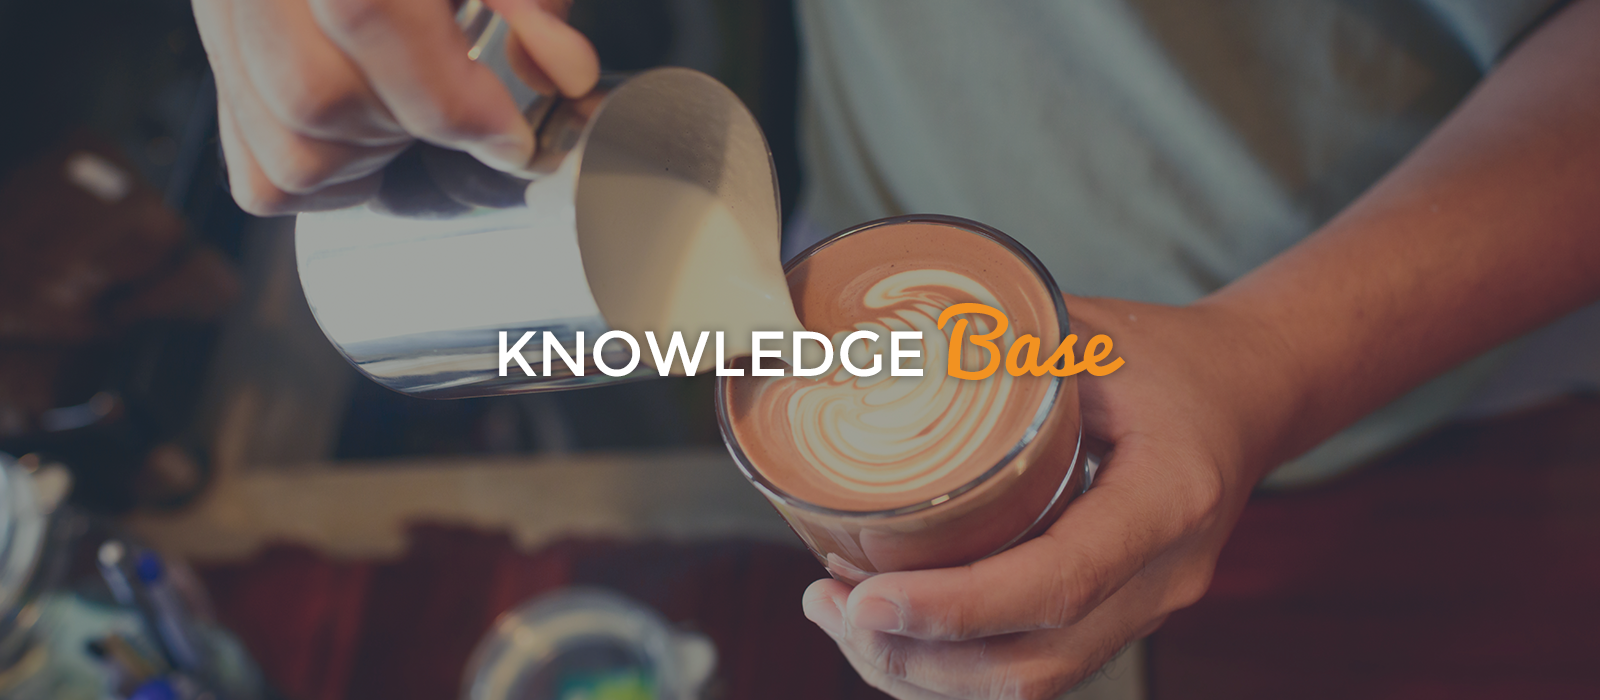 Knowledge Base over a Coffee